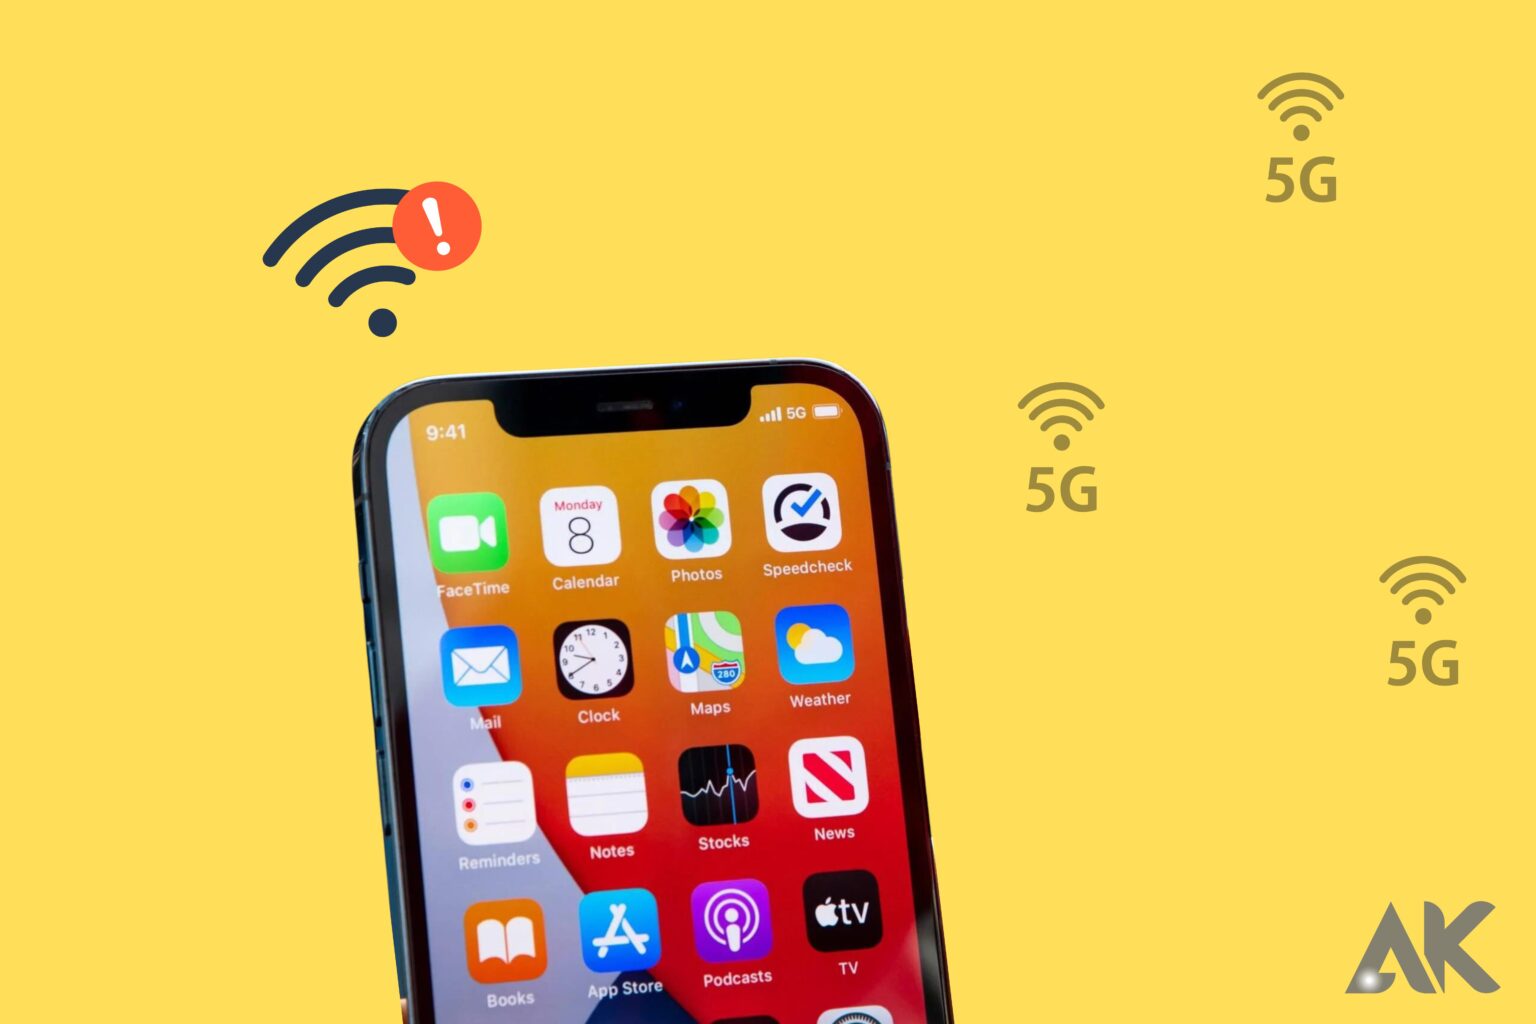 Top 5 Things to Do When You Have 5G but No Internet